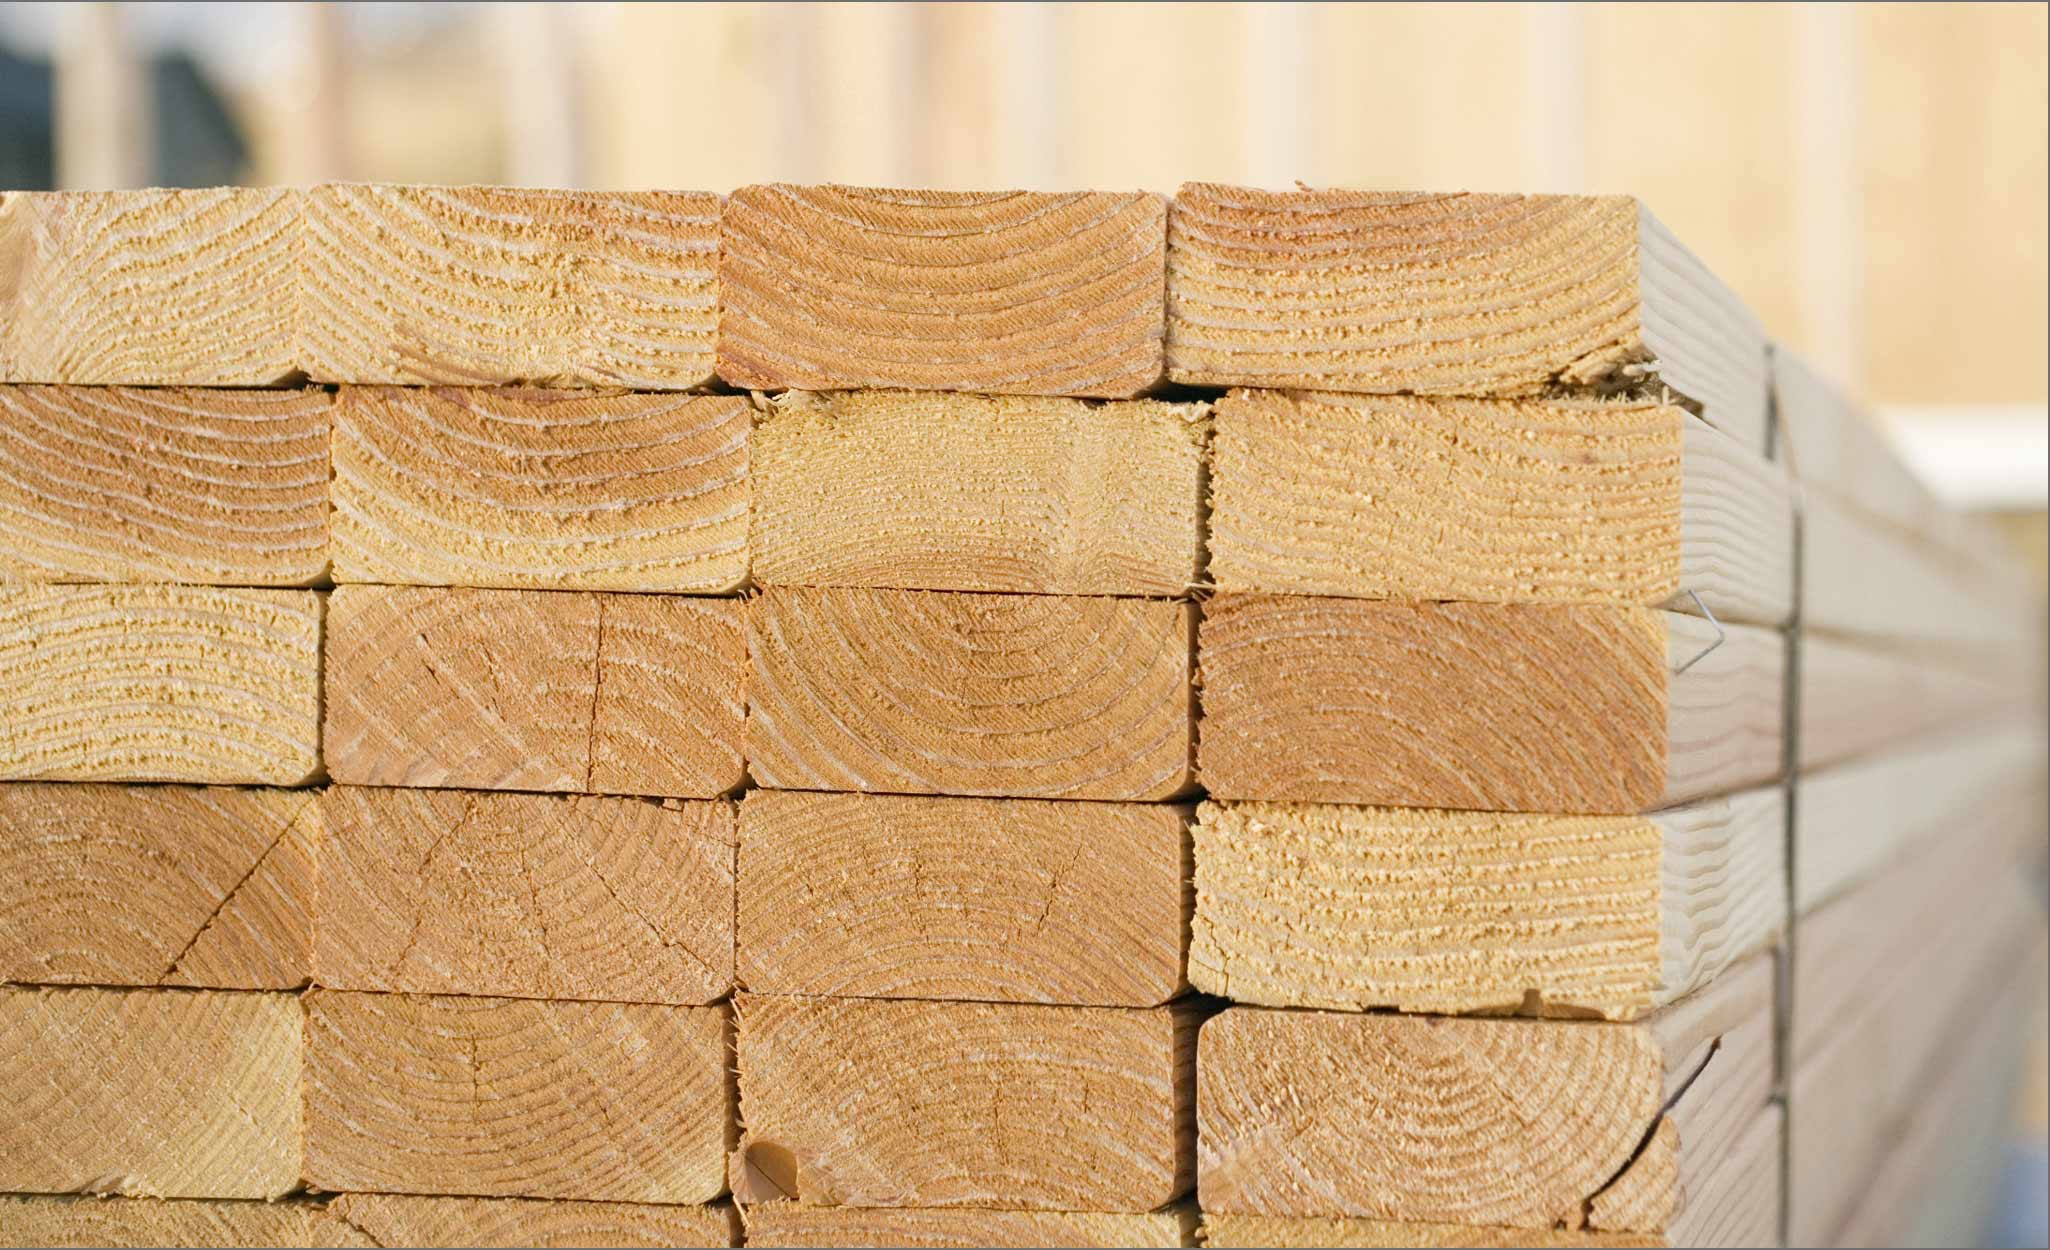 A stack of 2- x 4-inch boards.